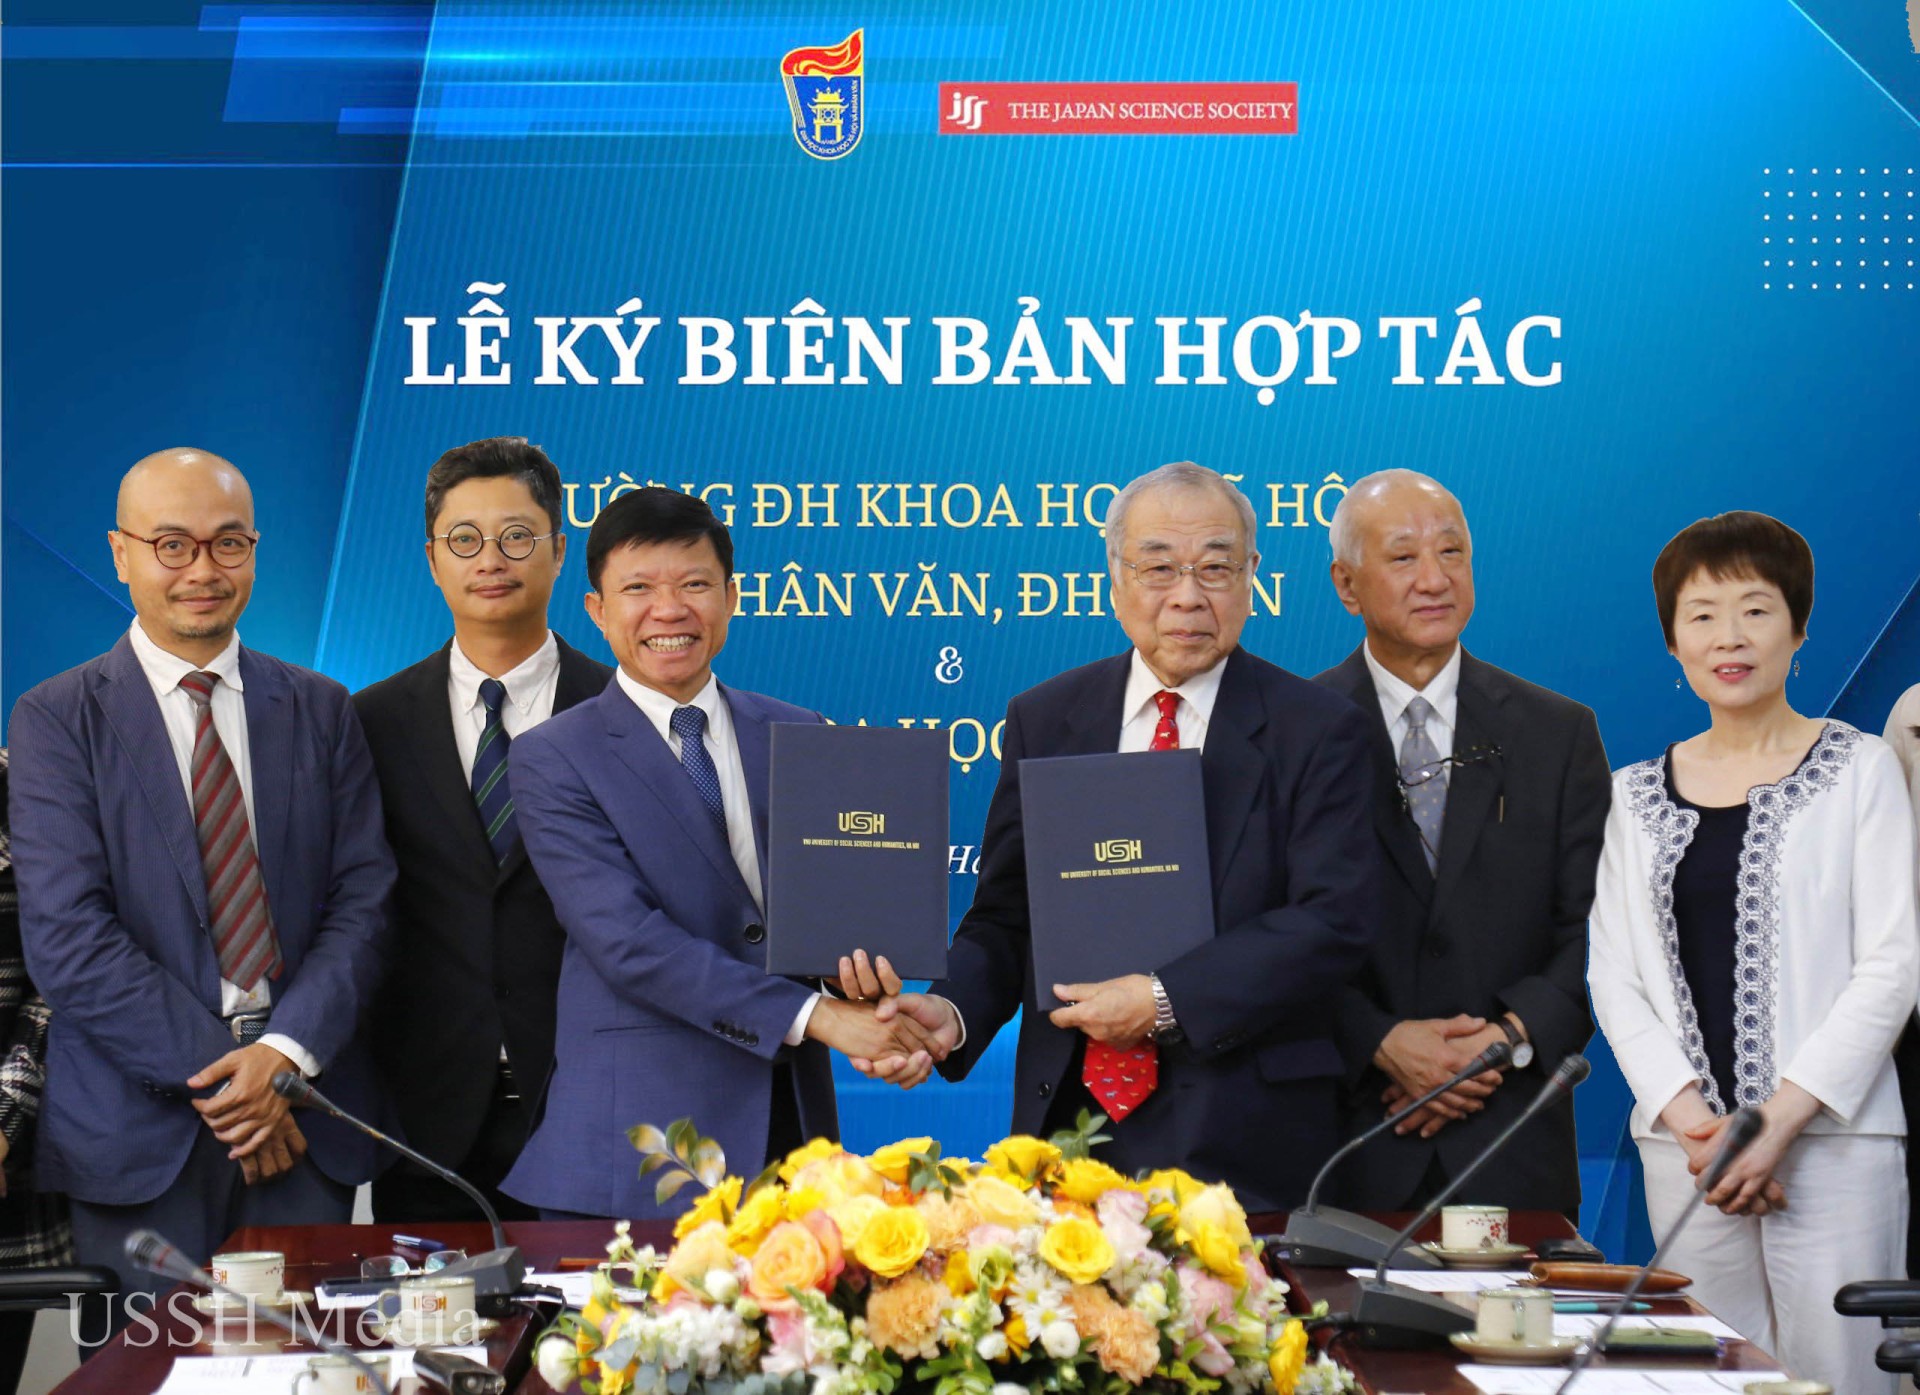 VNU-USSH – The very first Vietnamese university selected to participate in JSS's research book donation project